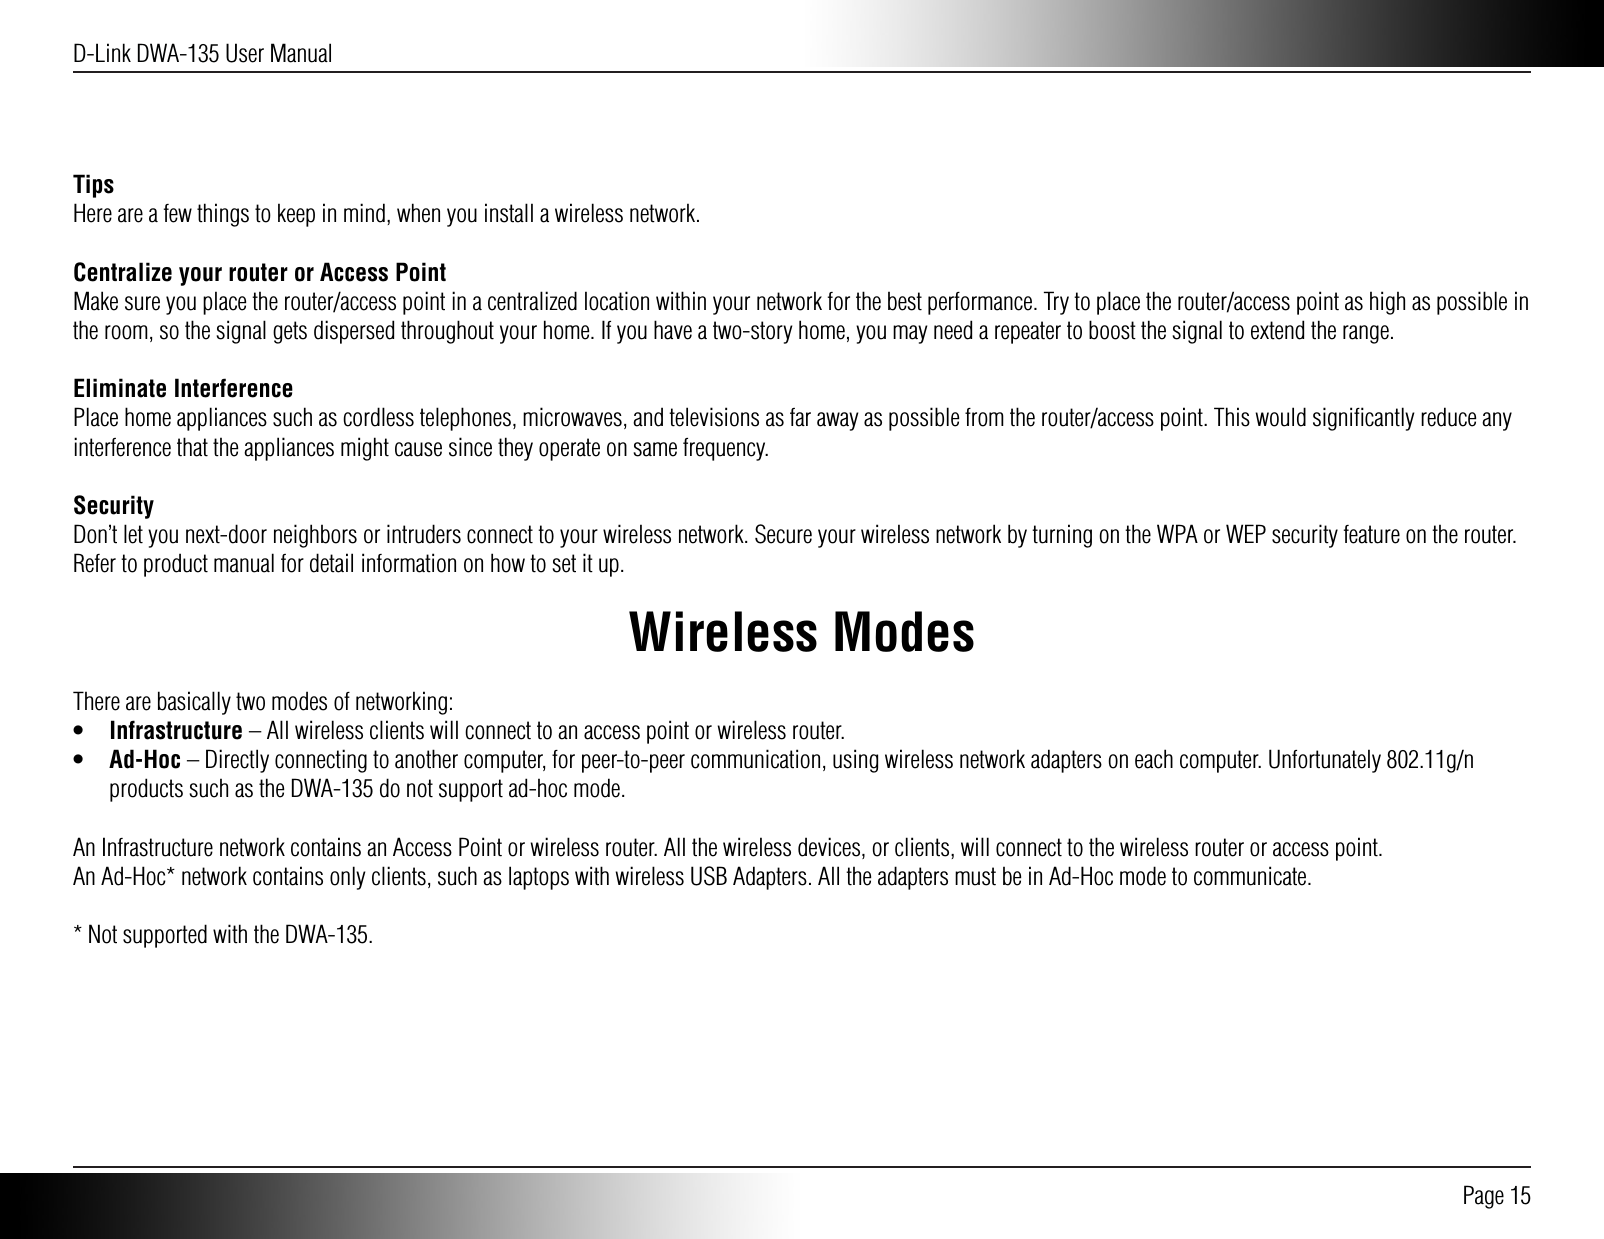 D-Link DWA-135 User Manual Page 15TipsHere are a few things to keep in mind, when you install a wireless network. Centralize your router or Access PointMake sure you place the router/access point in a centralized location within your network for the best performance. Try to place the router/access point as high as possible in the room, so the signal gets dispersed throughout your home. If you have a two-story home, you may need a repeater to boost the signal to extend the range.Eliminate InterferencePlace home appliances such as cordless telephones, microwaves, and televisions as far away as possible from the router/access point. This would signiﬁcantly reduce any interference that the appliances might cause since they operate on same frequency.SecurityDon’t let you next-door neighbors or intruders connect to your wireless network. Secure your wireless network by turning on the WPA or WEP security feature on the router. Refer to product manual for detail information on how to set it up.Wireless ModesThere are basically two modes of networking:• Infrastructure – All wireless clients will connect to an access point or wireless router.• Ad-Hoc – Directly connecting to another computer, for peer-to-peer communication, using wireless network adapters on each computer. Unfortunately 802.11g/n products such as the DWA-135 do not support ad-hoc mode.An Infrastructure network contains an Access Point or wireless router. All the wireless devices, or clients, will connect to the wireless router or access point.An Ad-Hoc* network contains only clients, such as laptops with wireless USB Adapters. All the adapters must be in Ad-Hoc mode to communicate.* Not supported with the DWA-135.